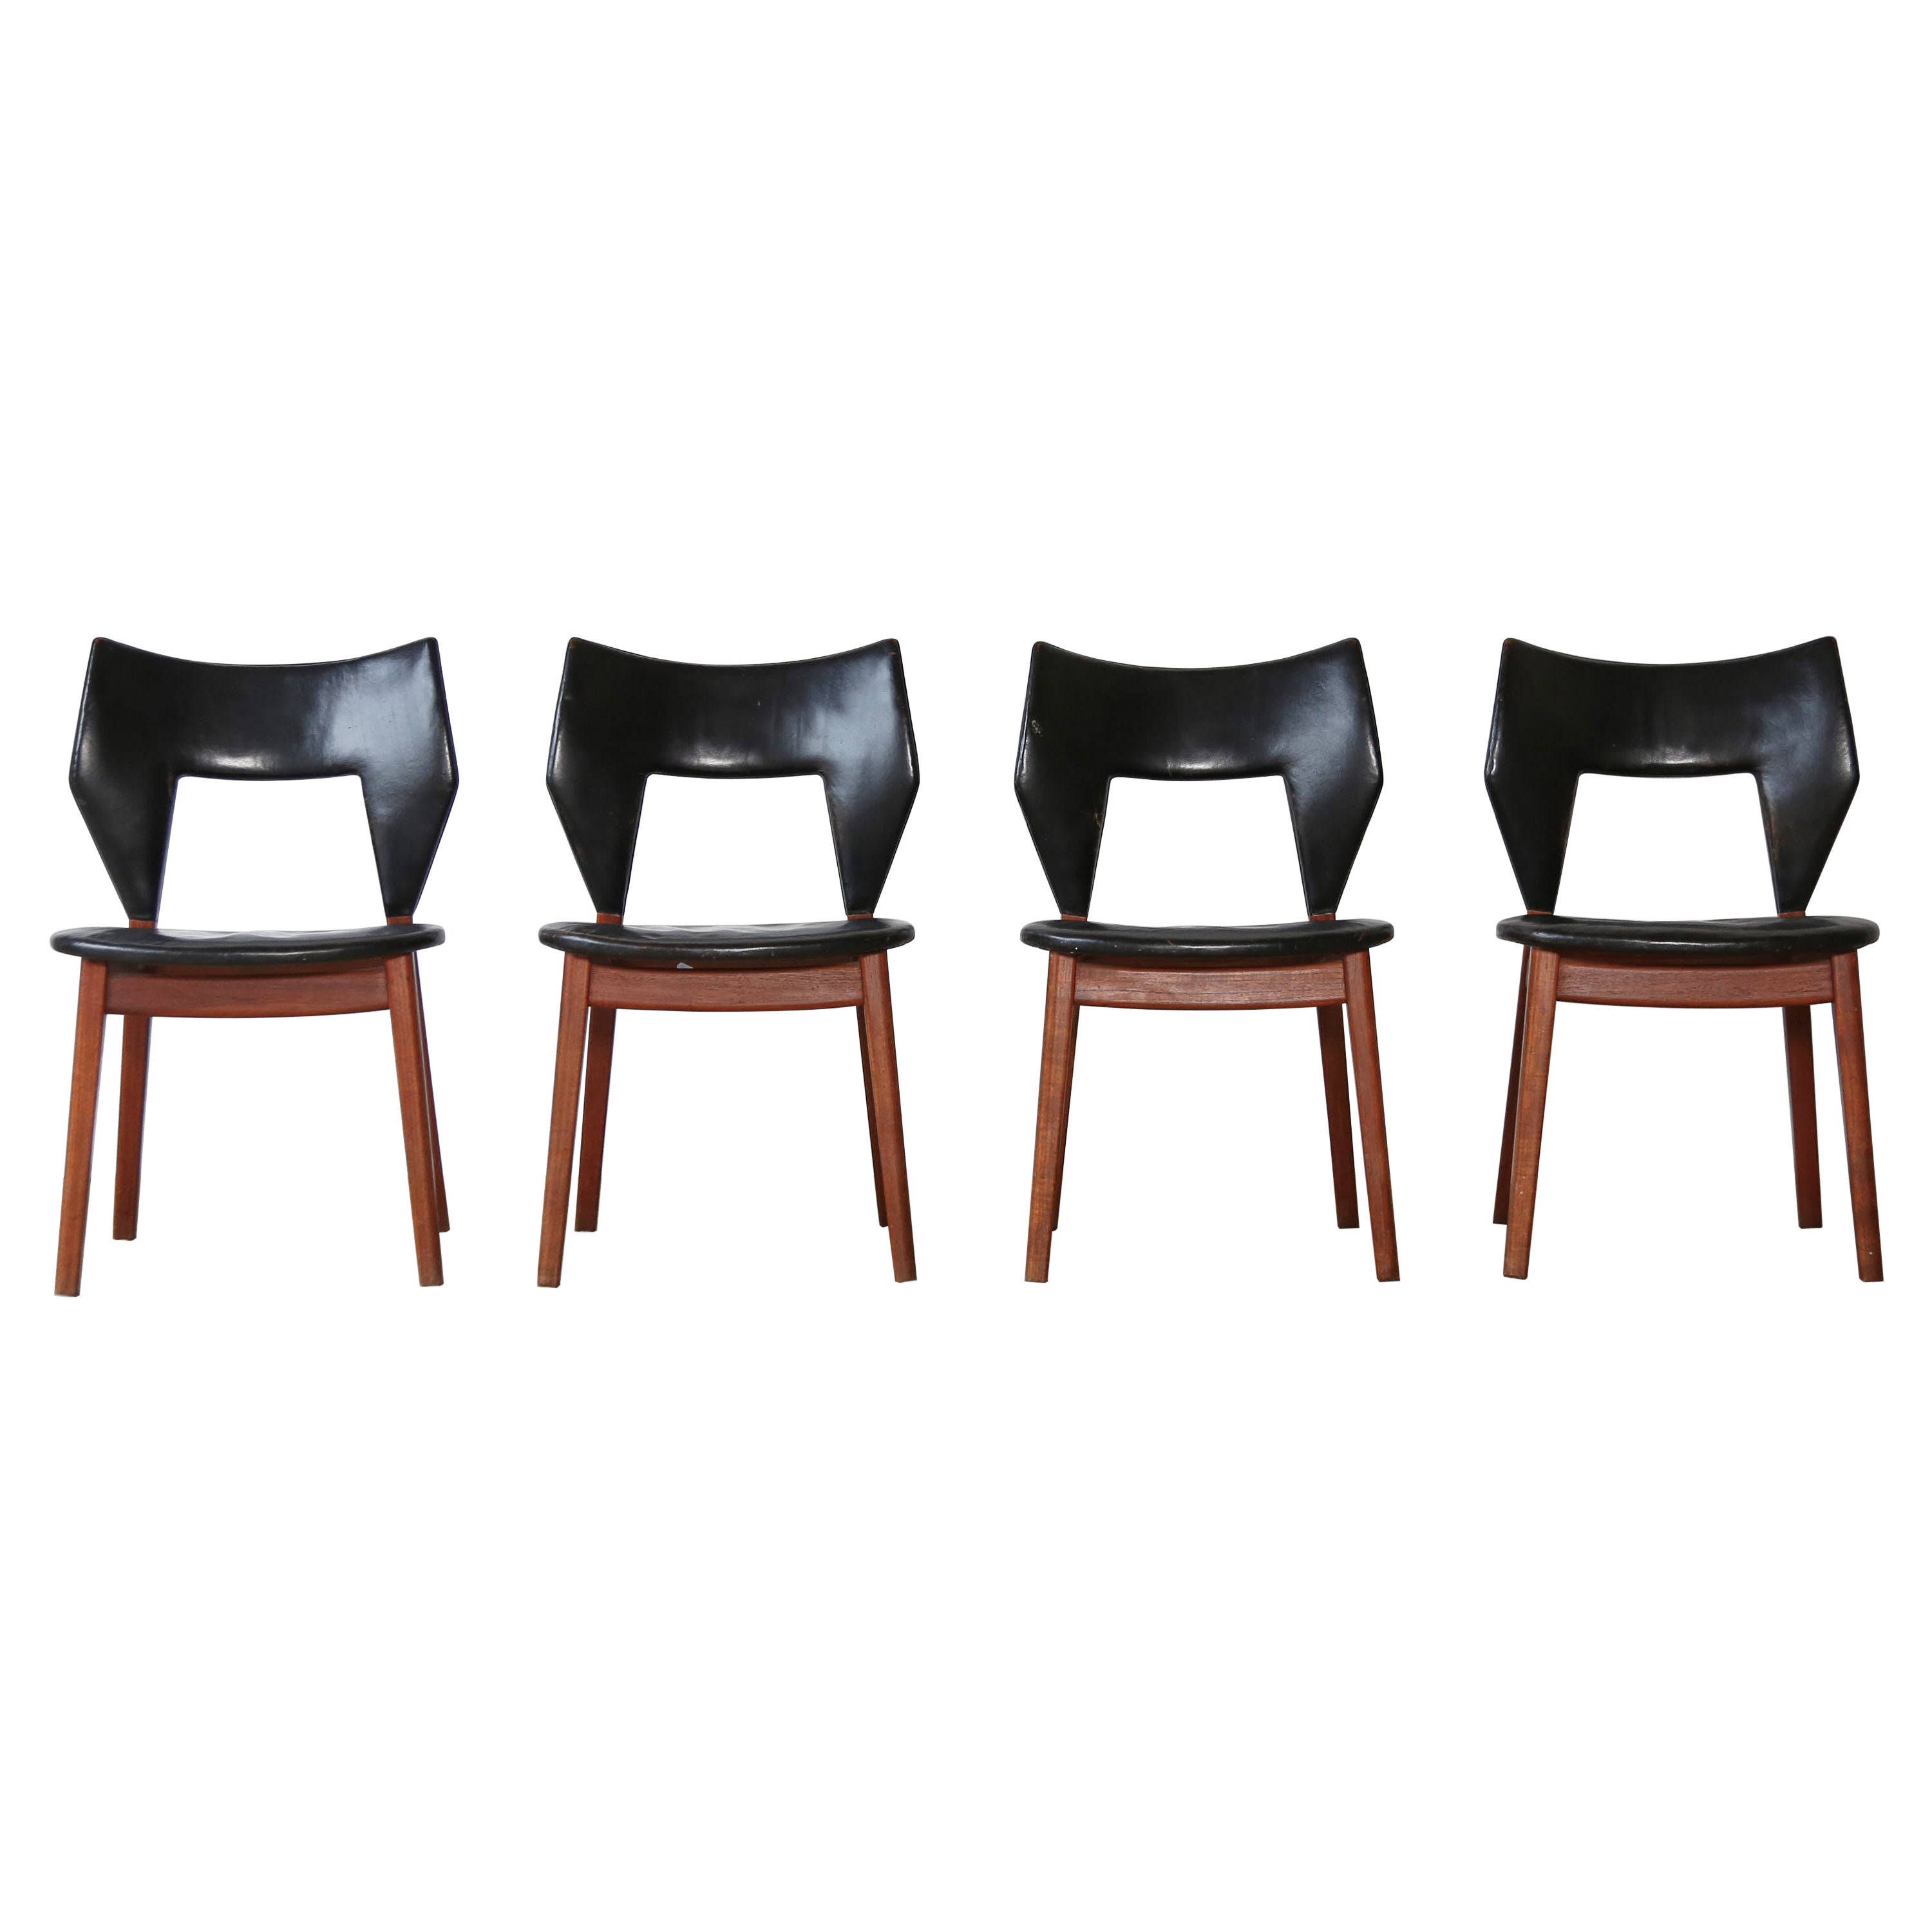 Edvard and Tove Kindt-Larsen Dining Chairs, Thorald Madsens, Denmark, 1950s For Sale